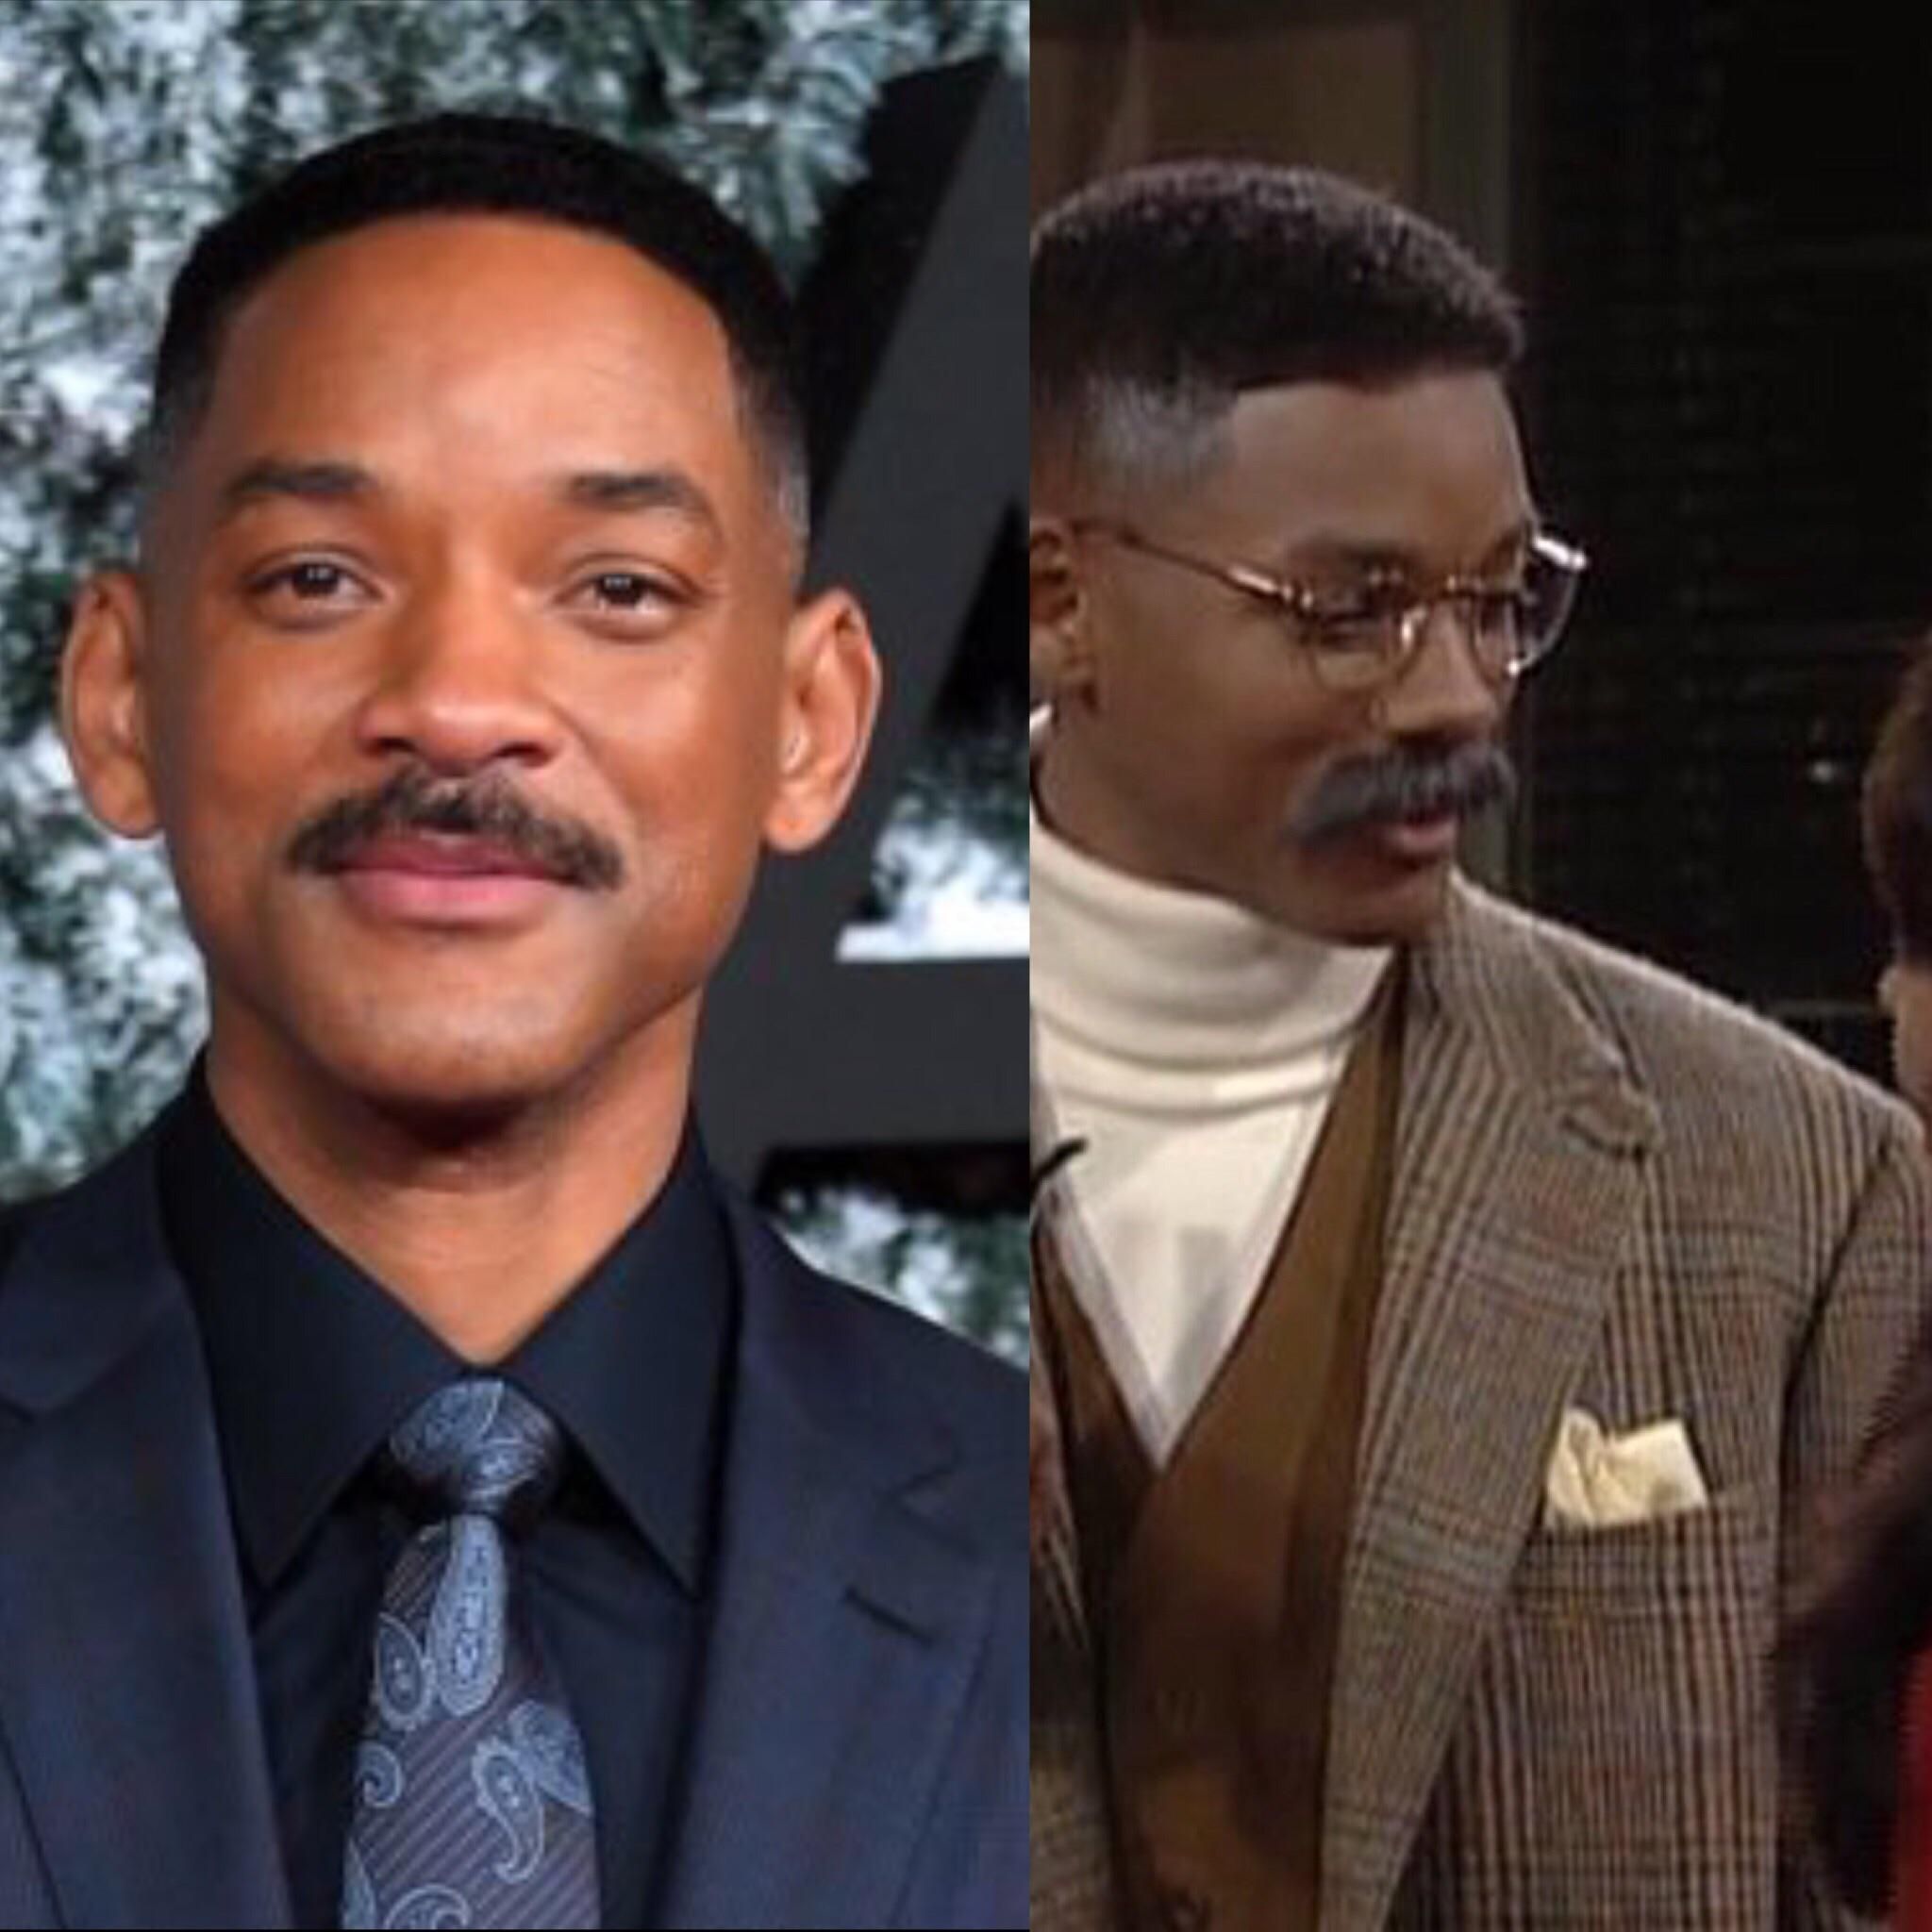 Will Smith finally looks how he did in the 1994 episode of Fresh Prince where he dresses up as someone's dad.